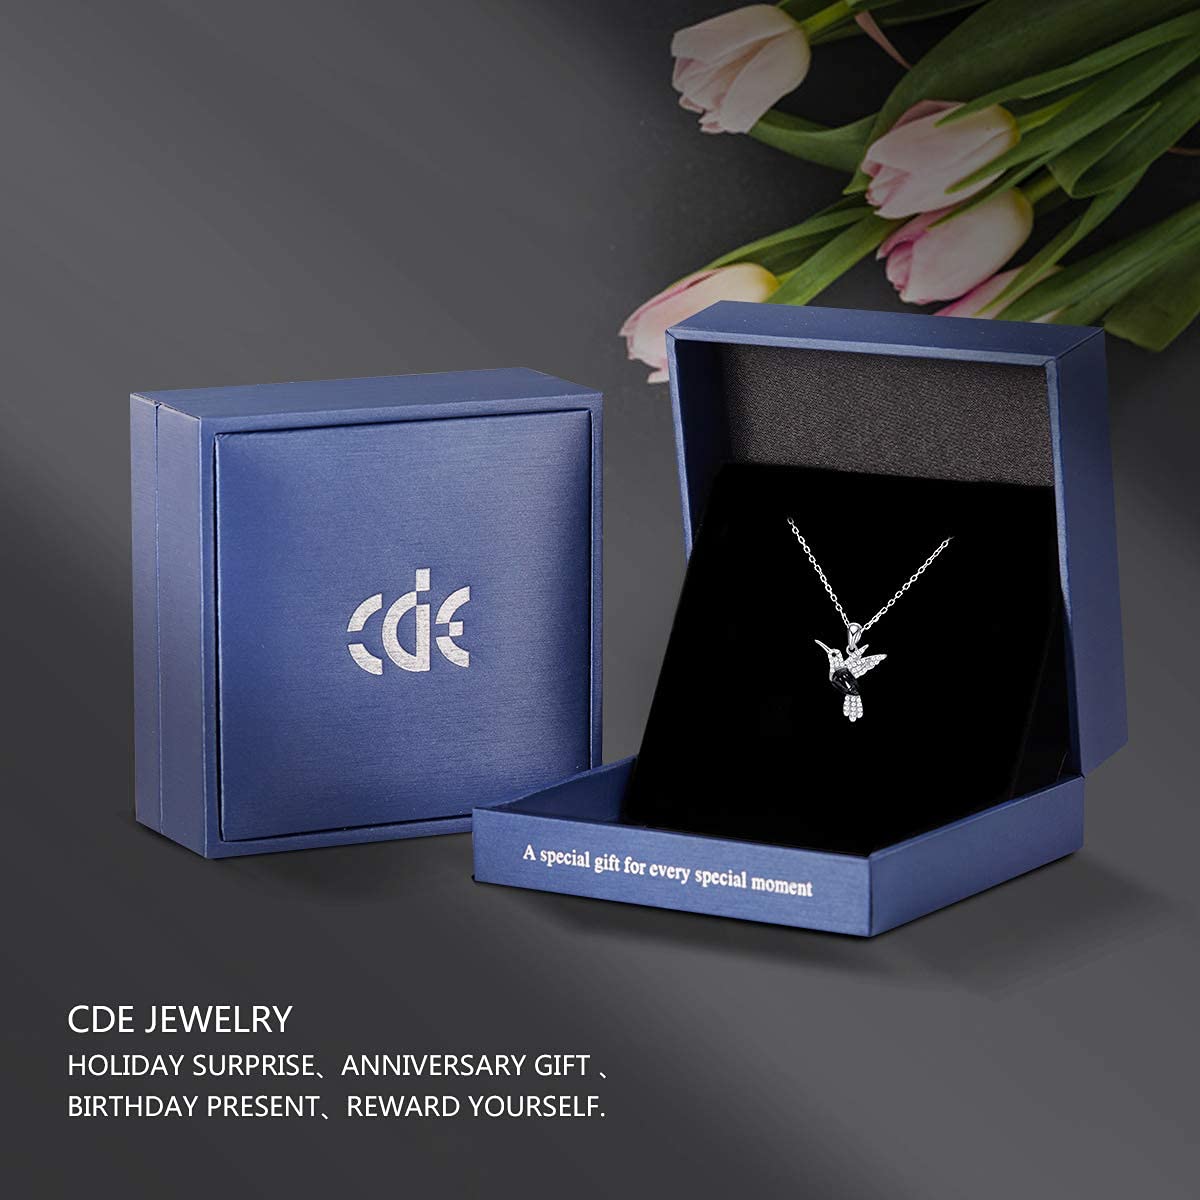 CDE Christmas Mother's Day Valentine’s Day Necklace Gifts for Women Hummingbird Necklaces S925 Sterling Silver Necklaces for Women Embellished with Crystals from Austria Birthday Jewelry Gifts for Wife Animal Necklace for Girlfriend Mom